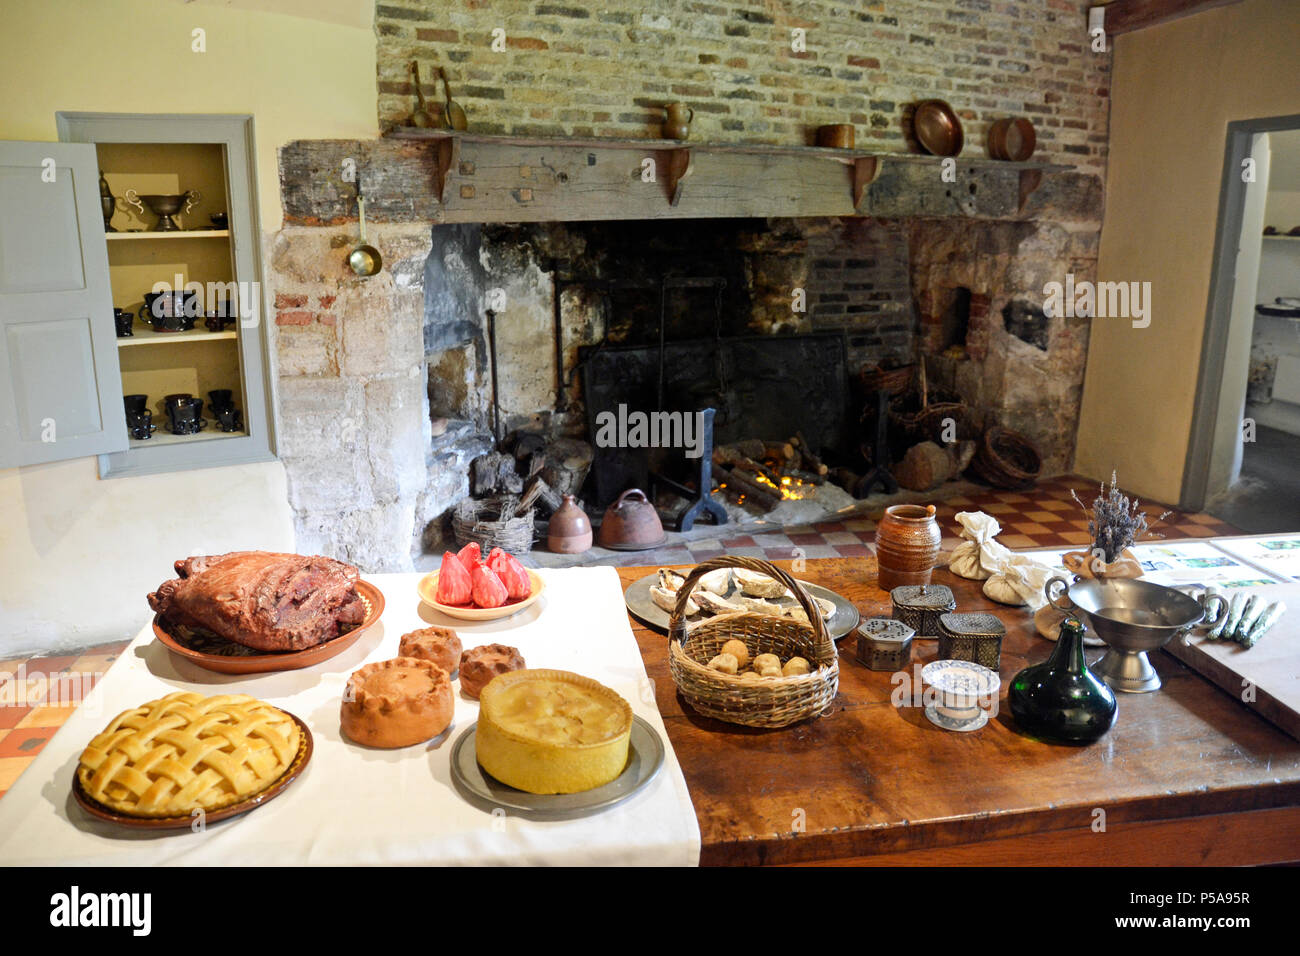 Oliver Cromwell's House in Ely, Cambridgeshire, England, UK. The kitchen dates from about 1215. Stock Photo